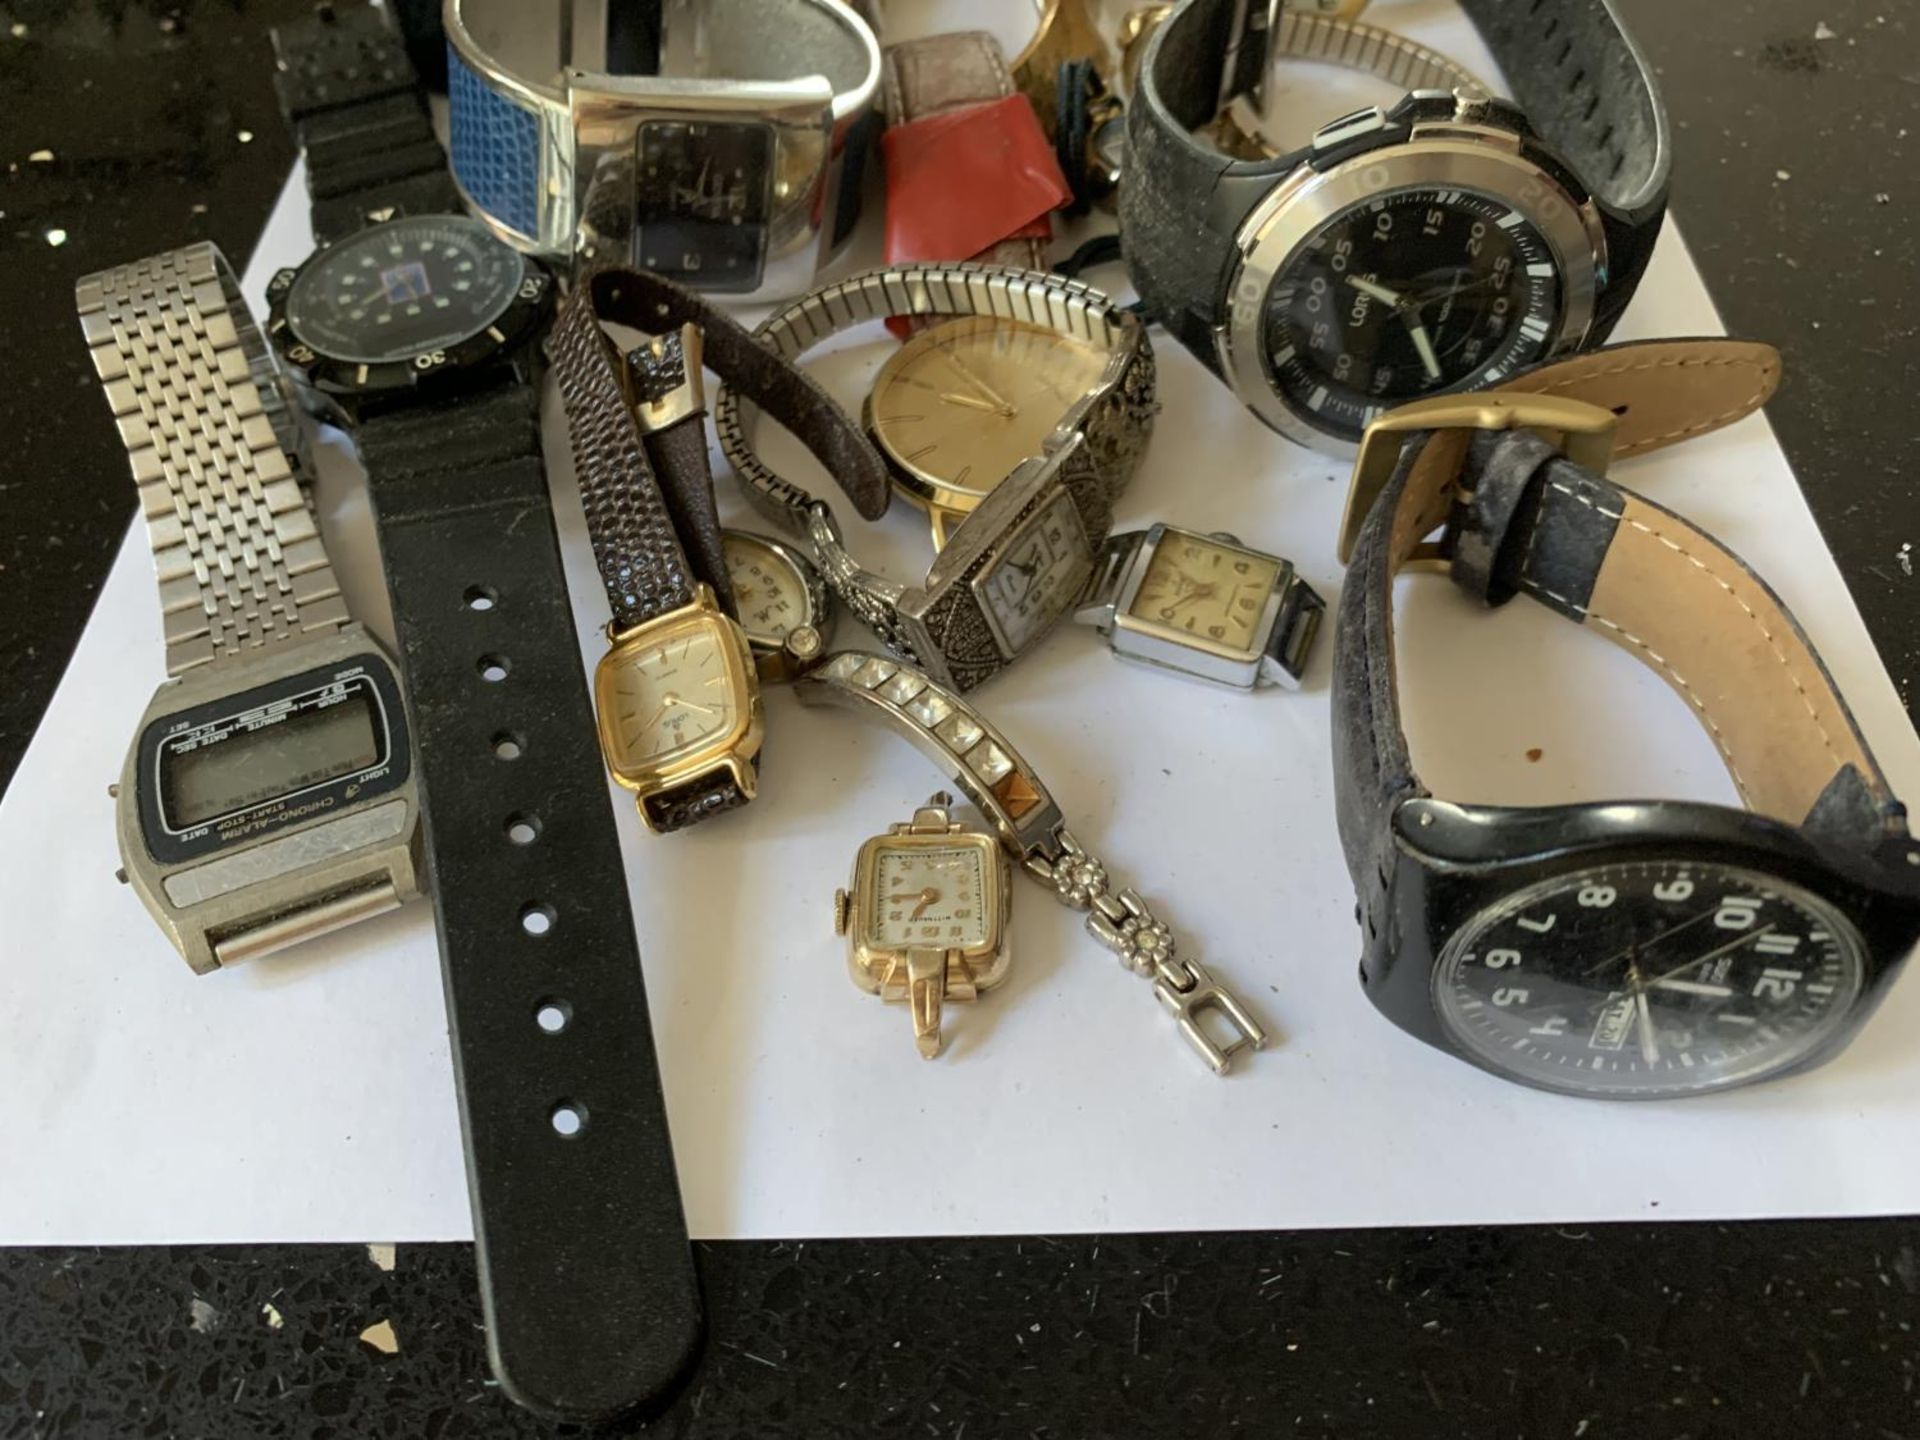 A LARGE COLLECTION OF WATCHES AND WATCH PARTS - Image 4 of 4